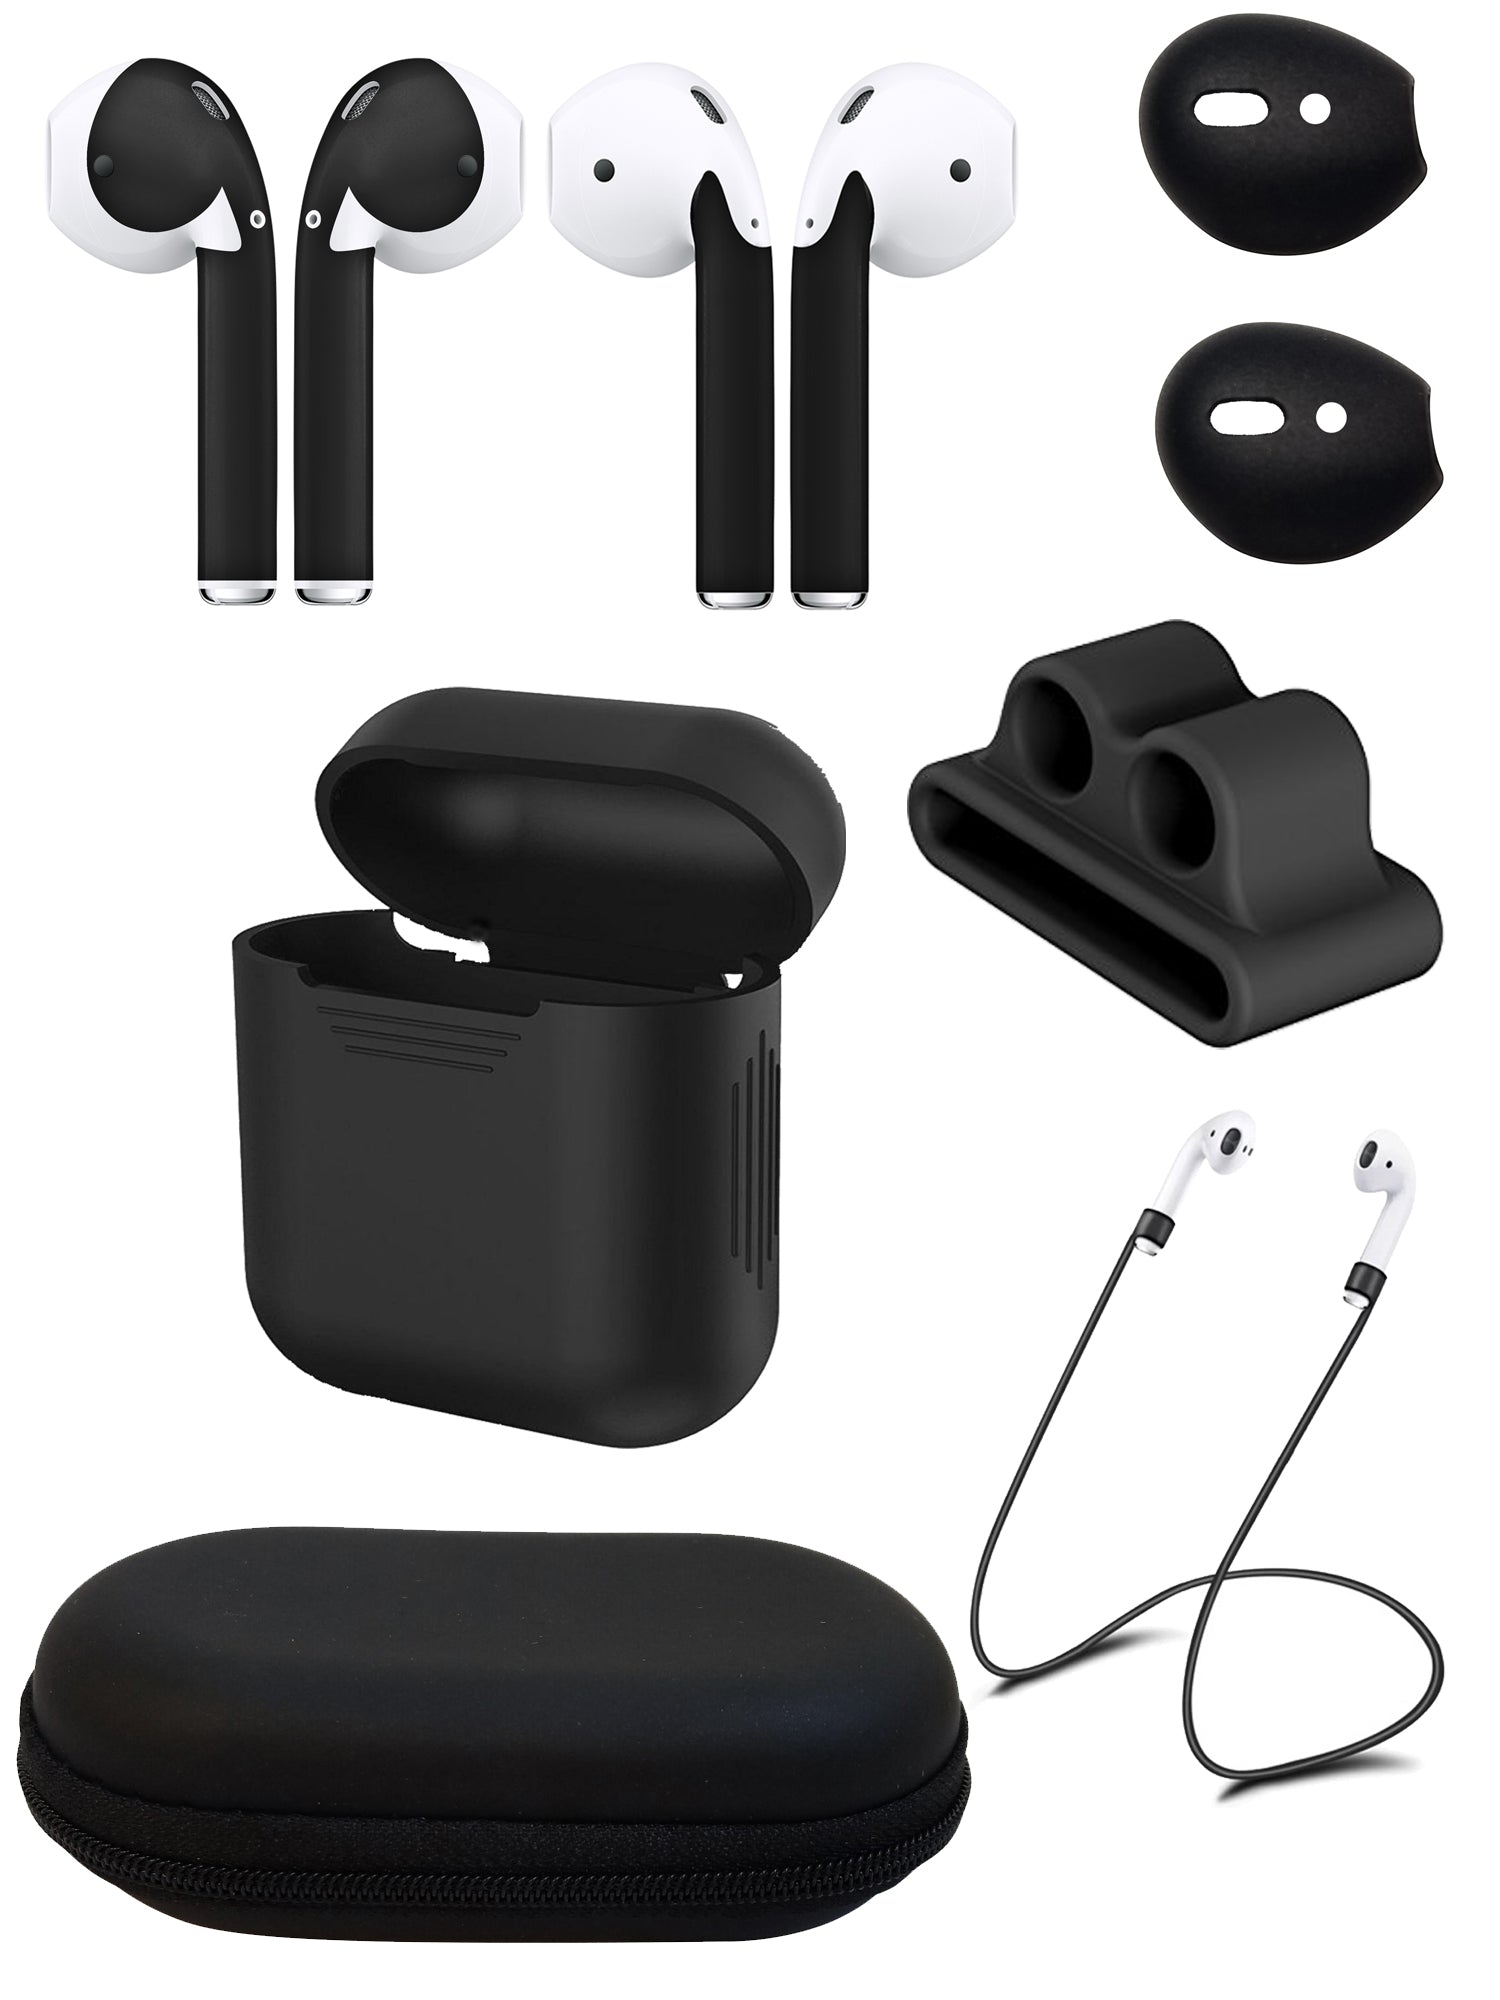 hane Tak for din hjælp lever Ultimate Airpod Accessory Gift Pack - AirPod Skins, Case, Straps, Band